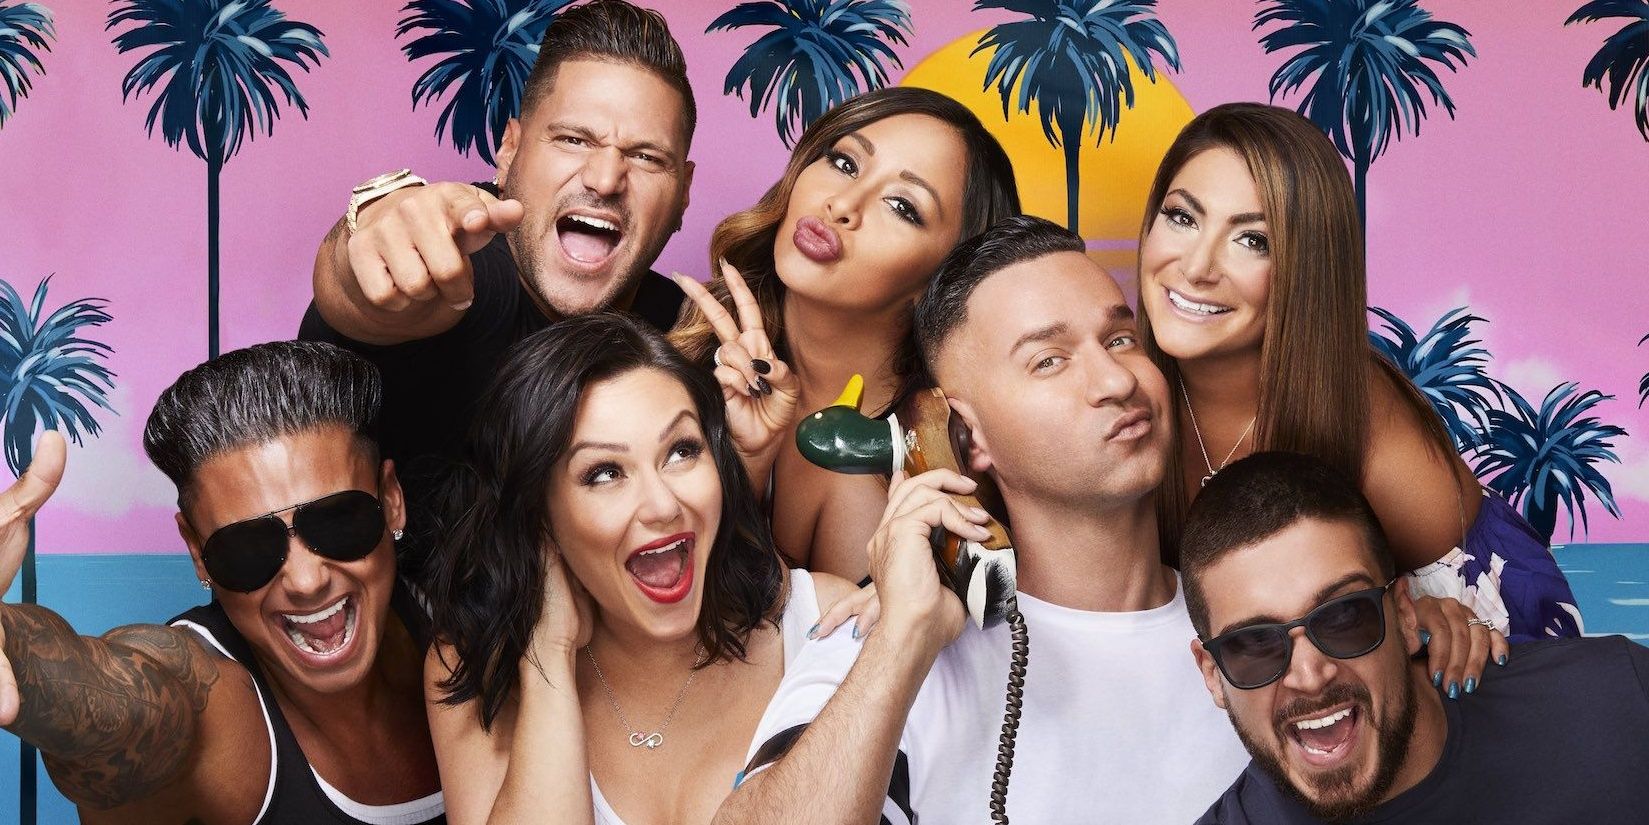 An image of the Jersey Shore cast posing together for their new show